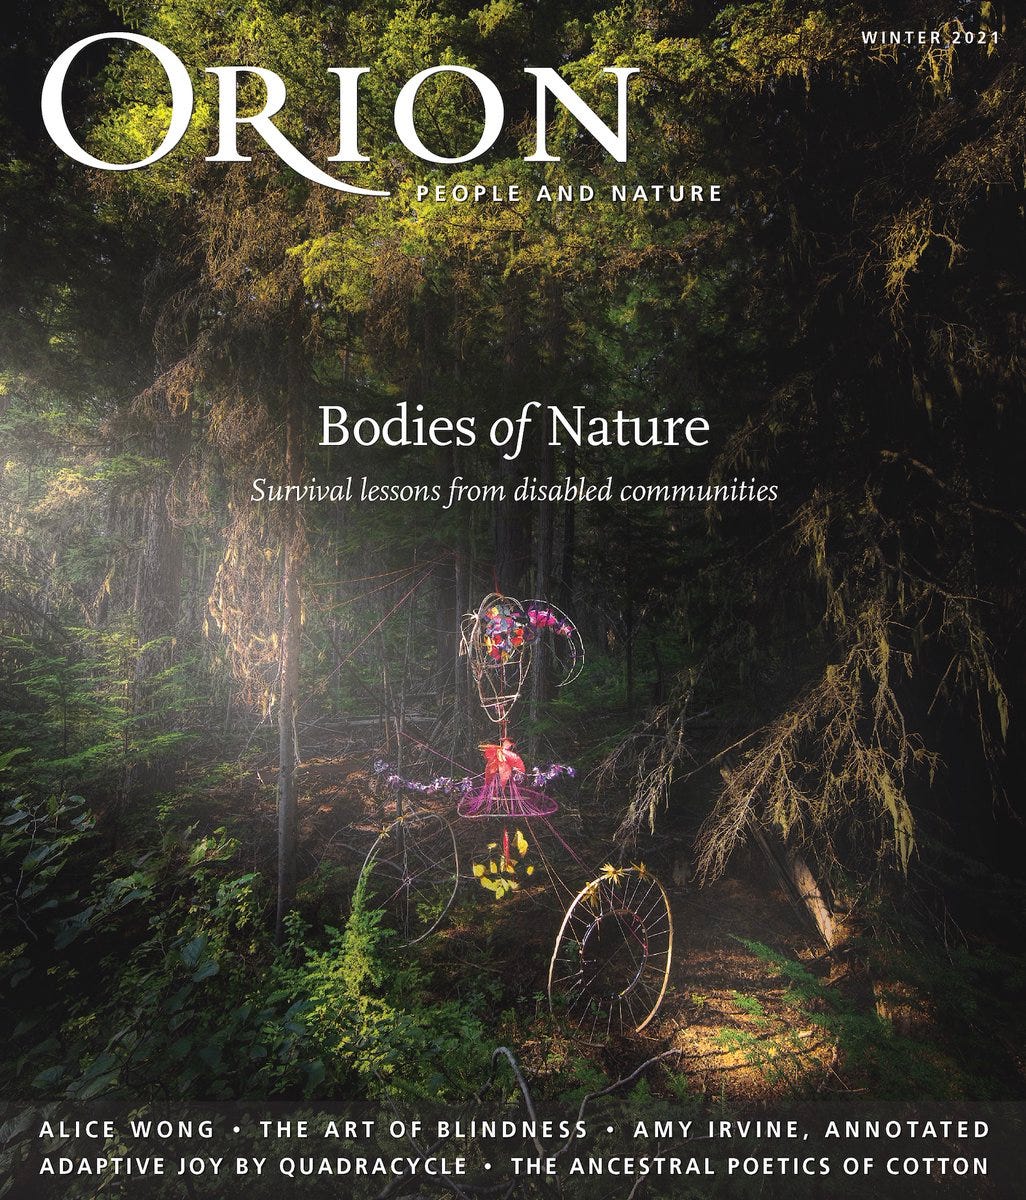 A beam of illuminated light streams into thick woods. In the center of the light stands a tall puppet figure, made out of wood, with two large wheels and bursts of bright colors in areas of the body. The figure has a spiked horn growing out of her head. The cover says Orion Magazine people and nature winter 2021. In the center in white font it says: Bodies of Nature, survival lessons from disabled communities. At the bottom are feature titles in white font: Alice Won, The Art of Blindness, Amy Irvine, Annotated, Adaptive Joy by Quadracycle, and The Ancestral Poetics of Cotton.